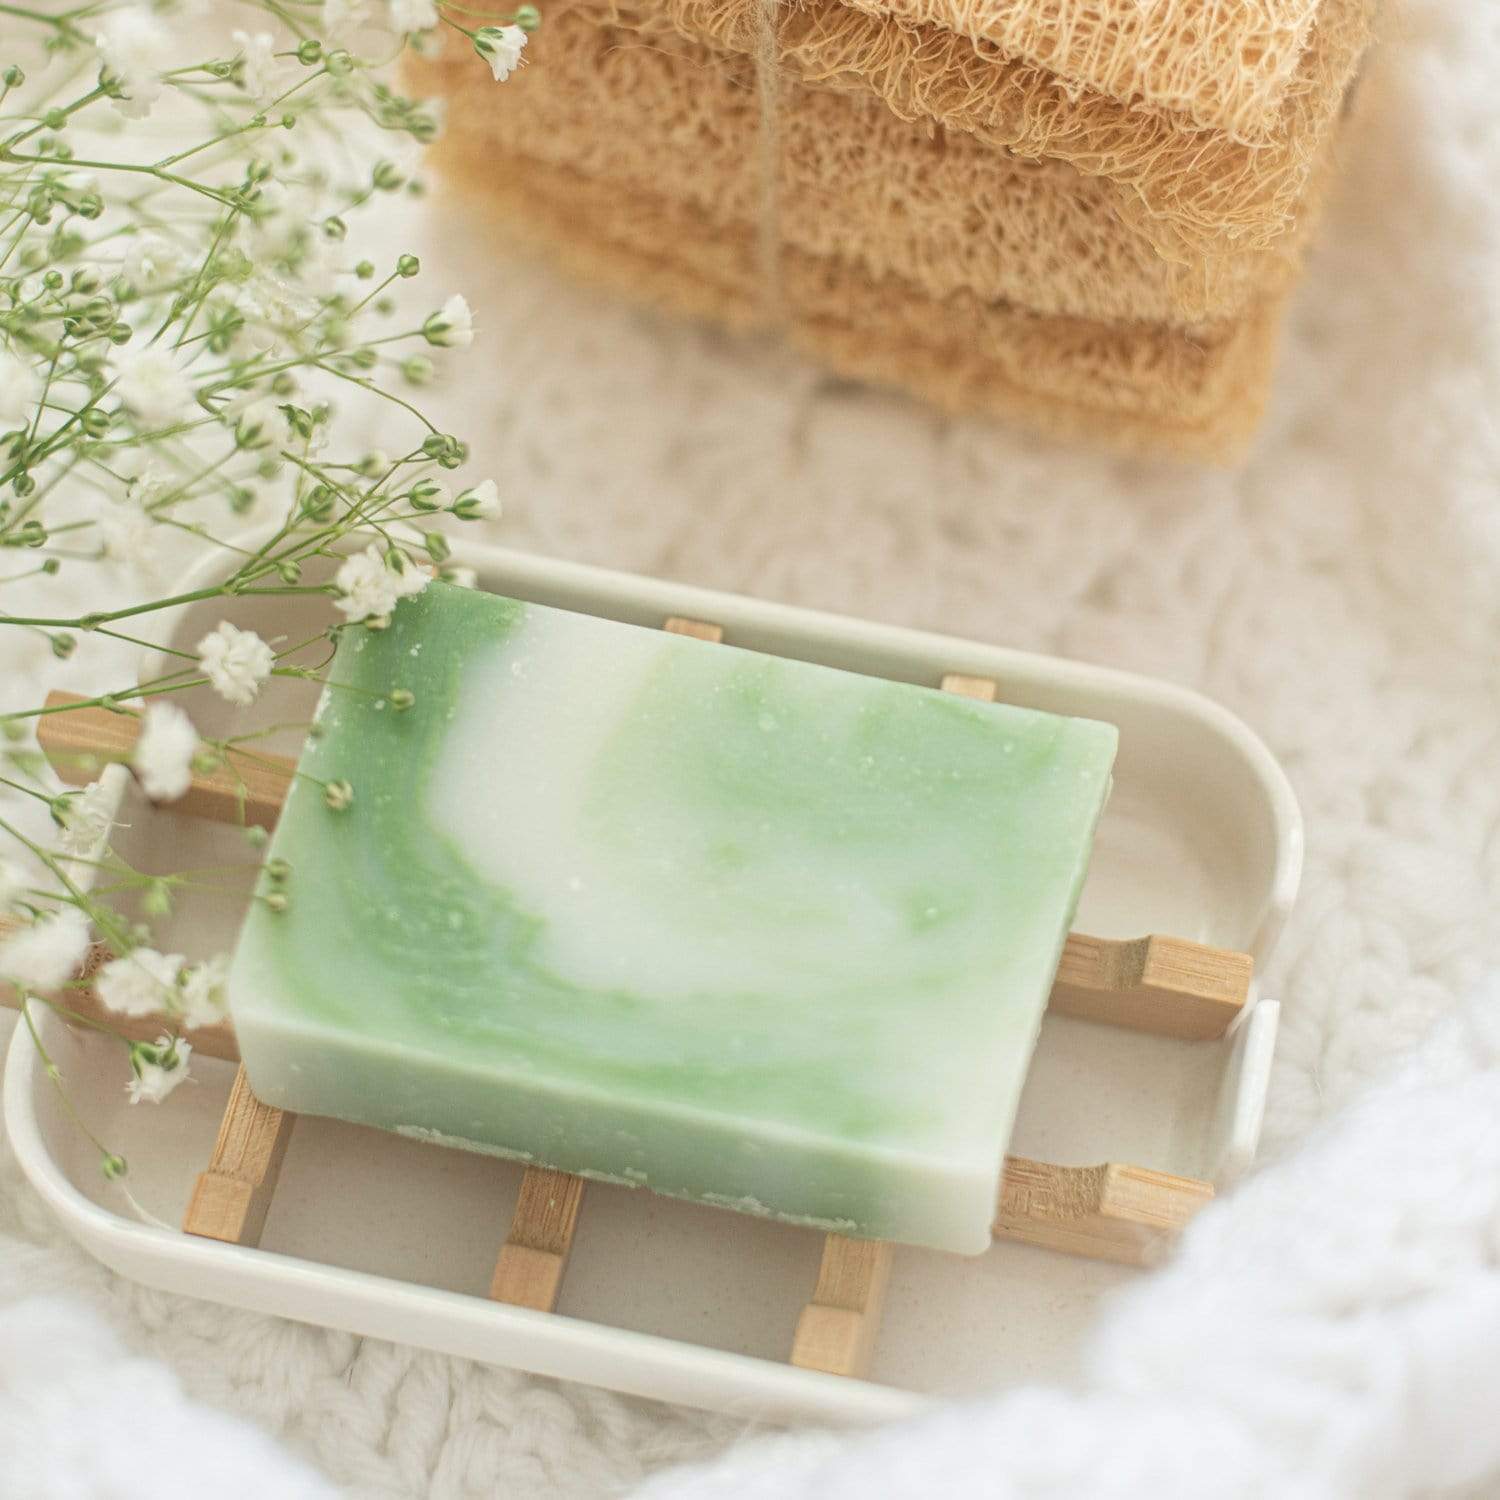 Green and white marble rectangle soap sitting in white soap dish with wood planks